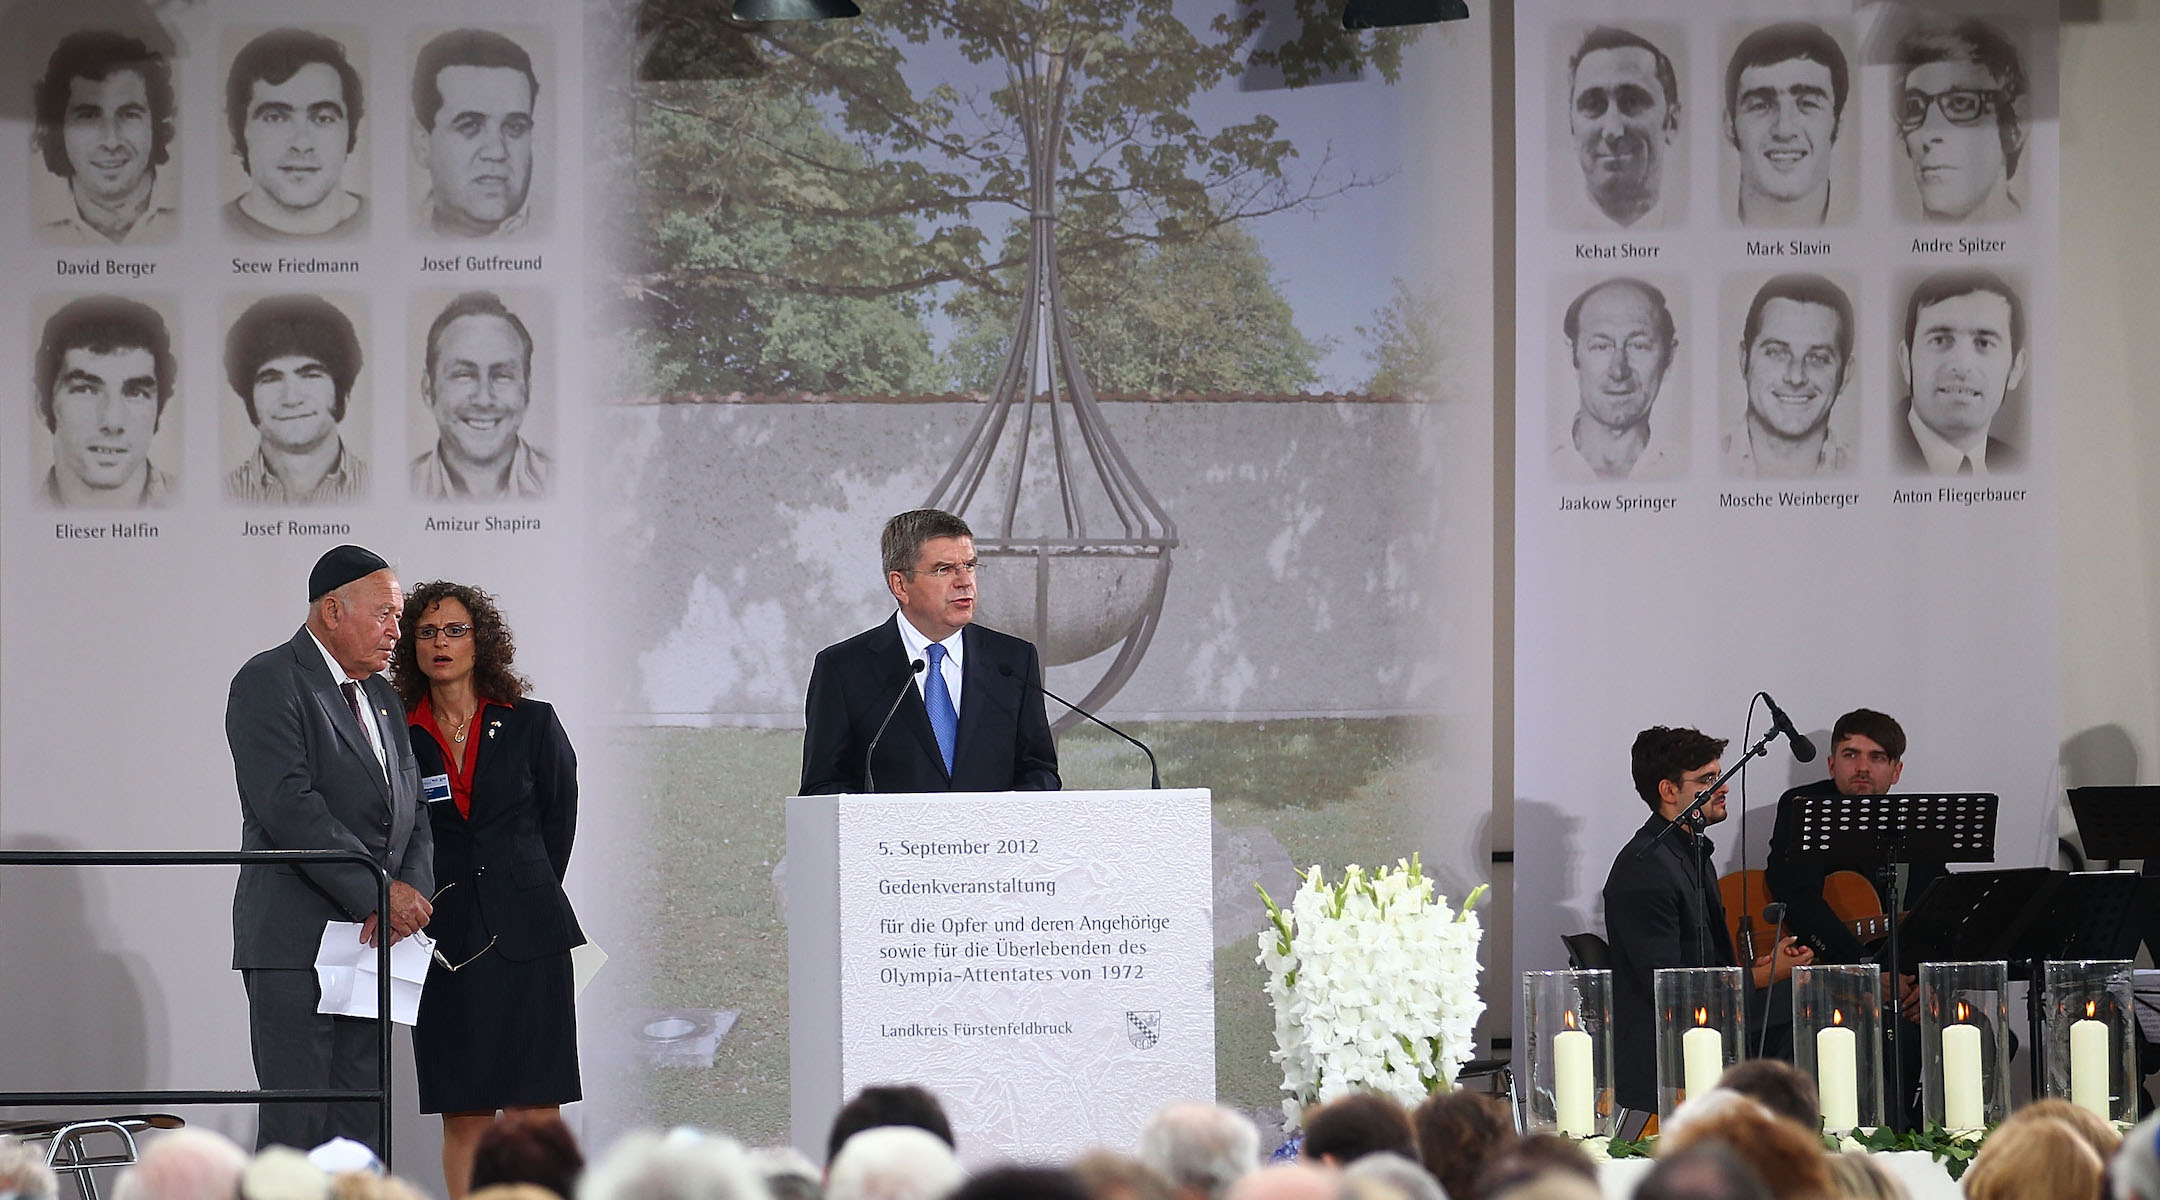 A memorial service commemorating the 40th anniversary of the 1972 Munich Olympics massacre was held Sept. 5, 2012 in Fuerstenfeldbruck, Germany. (Thomas Niedermueller/Getty Images)